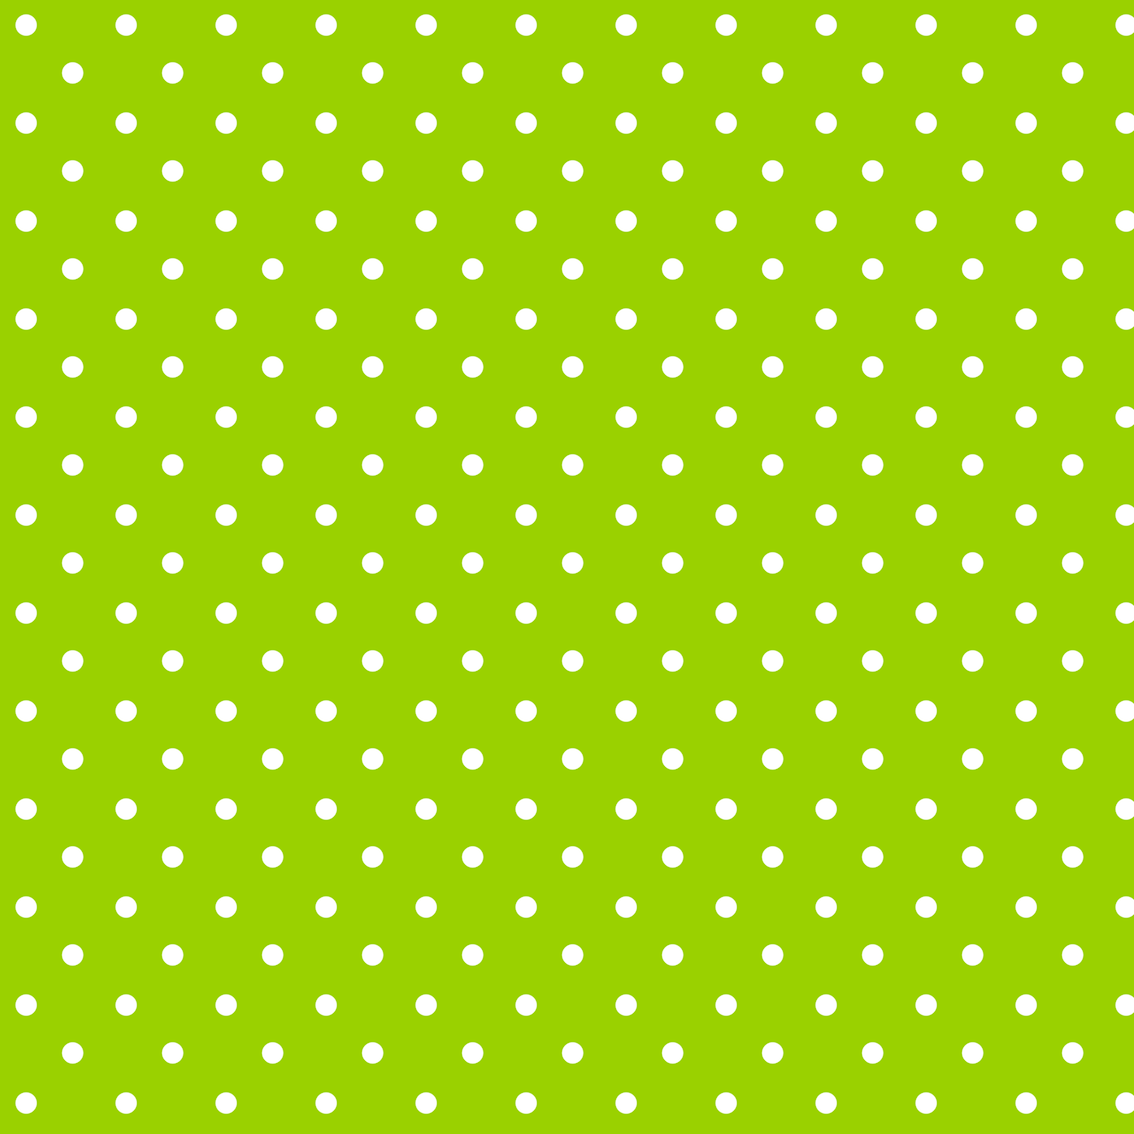 Free Srapbooking And Gift Wrapping Paper U2013 Yellow, Green And Blue Colored Frog And Polka Dot Paper And Baby Shower Card U2013 Ausdruckbares Scrapbooking Und Hdpng.com  - Polka Dot Background, Transparent background PNG HD thumbnail